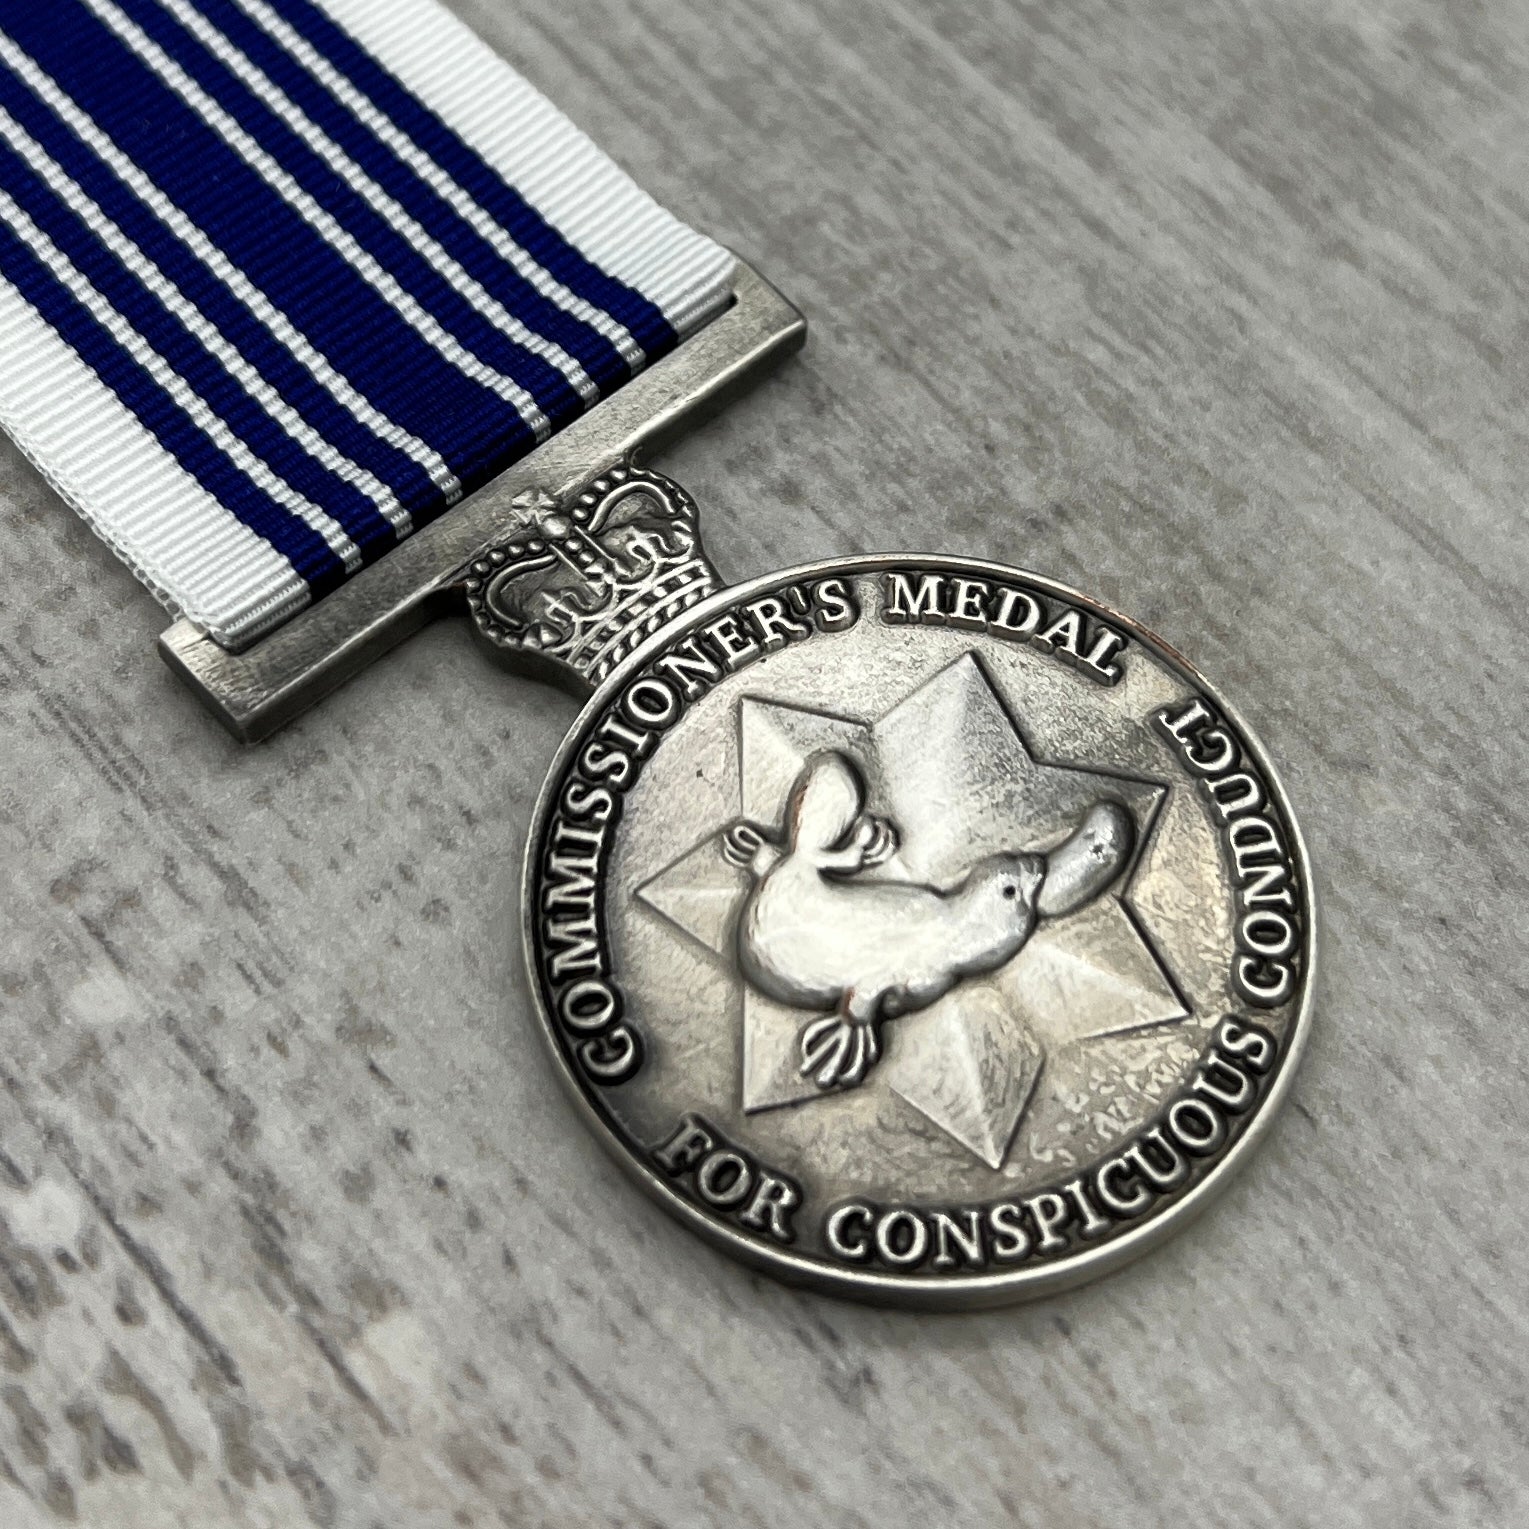 Australian Federal Police - Commissioner's Medal Conspicuous Conduct - Foxhole Medals